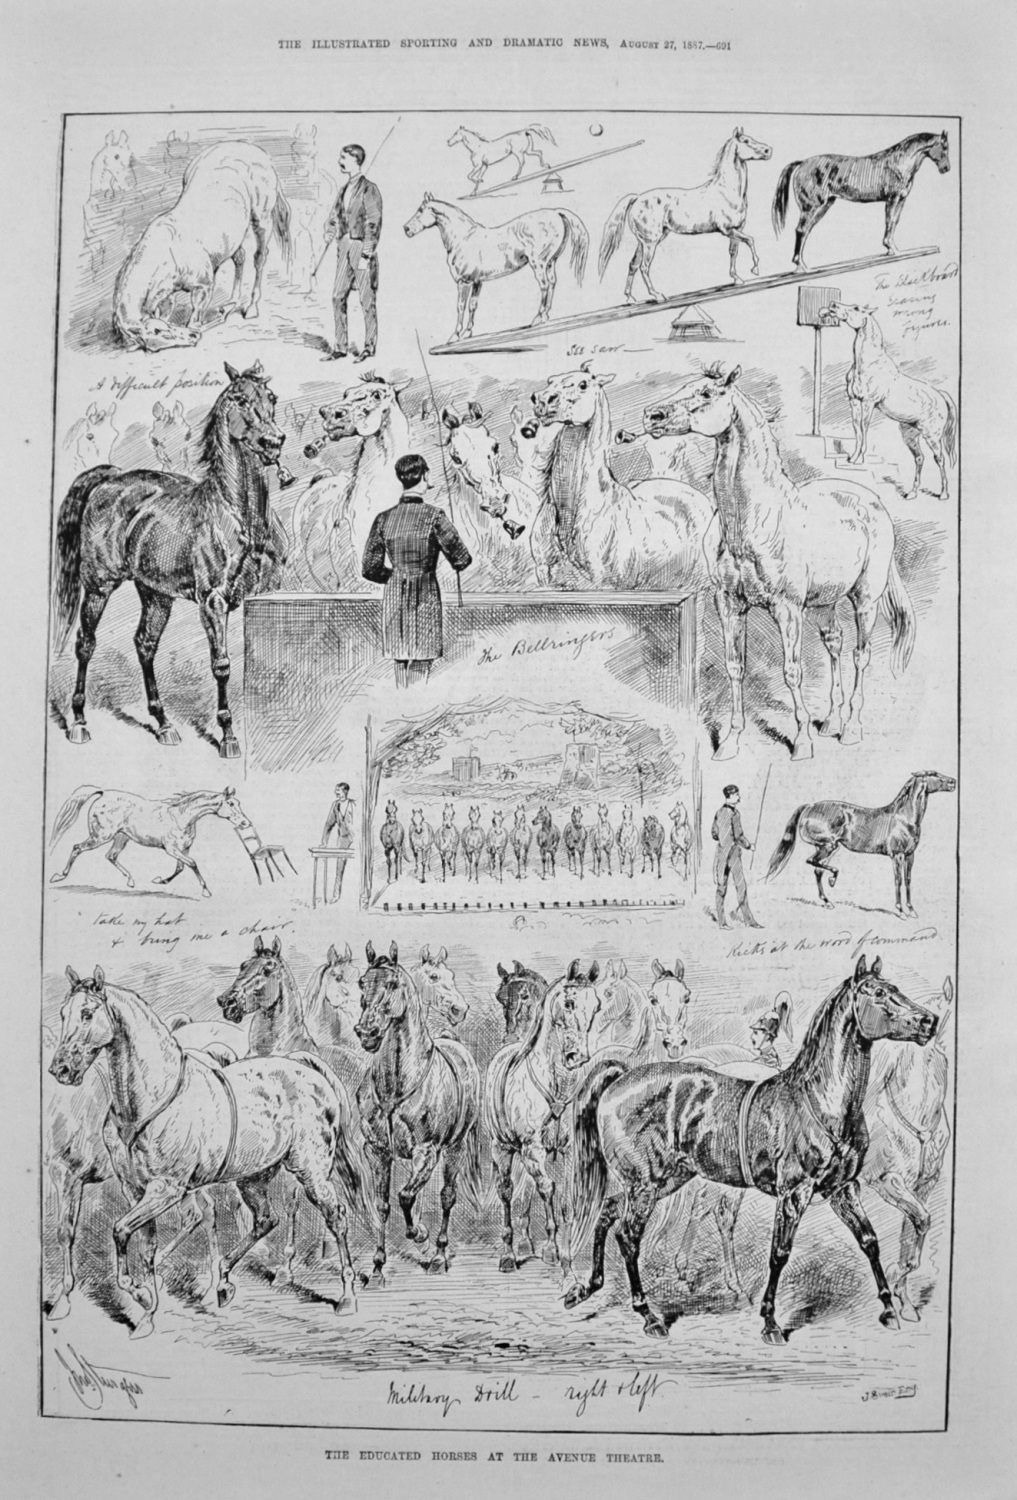 The Educated Horses at the Avenue Theatre. 1887